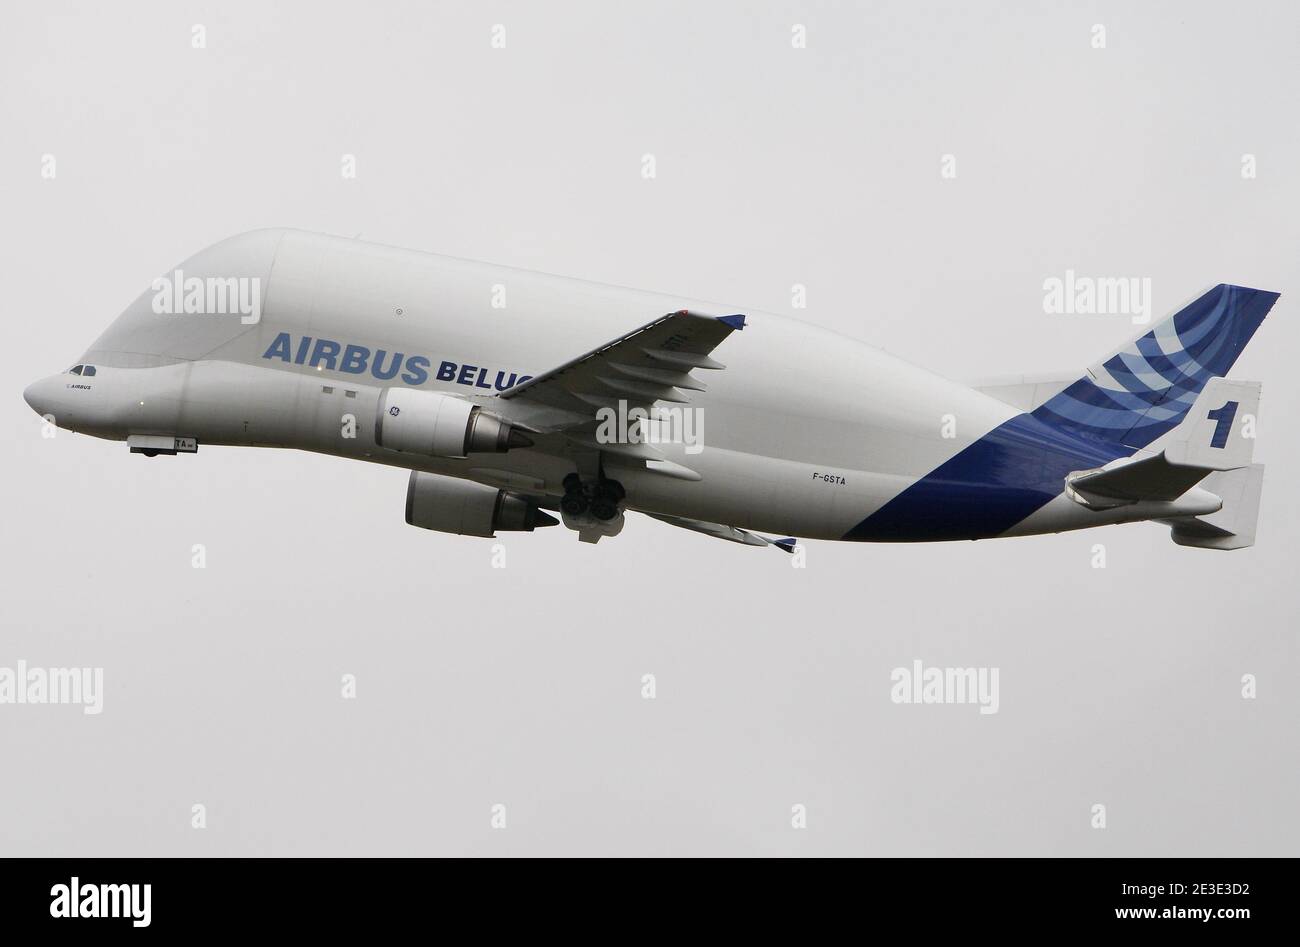 An Airbus A300-600ST 'Beluga', a version of the standard A300-600 wide-body airliner modified to carry aircraft parts and over-sized or awkward cargo, takes off from the Airbus plant in Colomiers, near Toulouse, southwestern France on January 14, 2009. Photo by Patrick Bernard/ABACAPRESS.COM Stock Photo